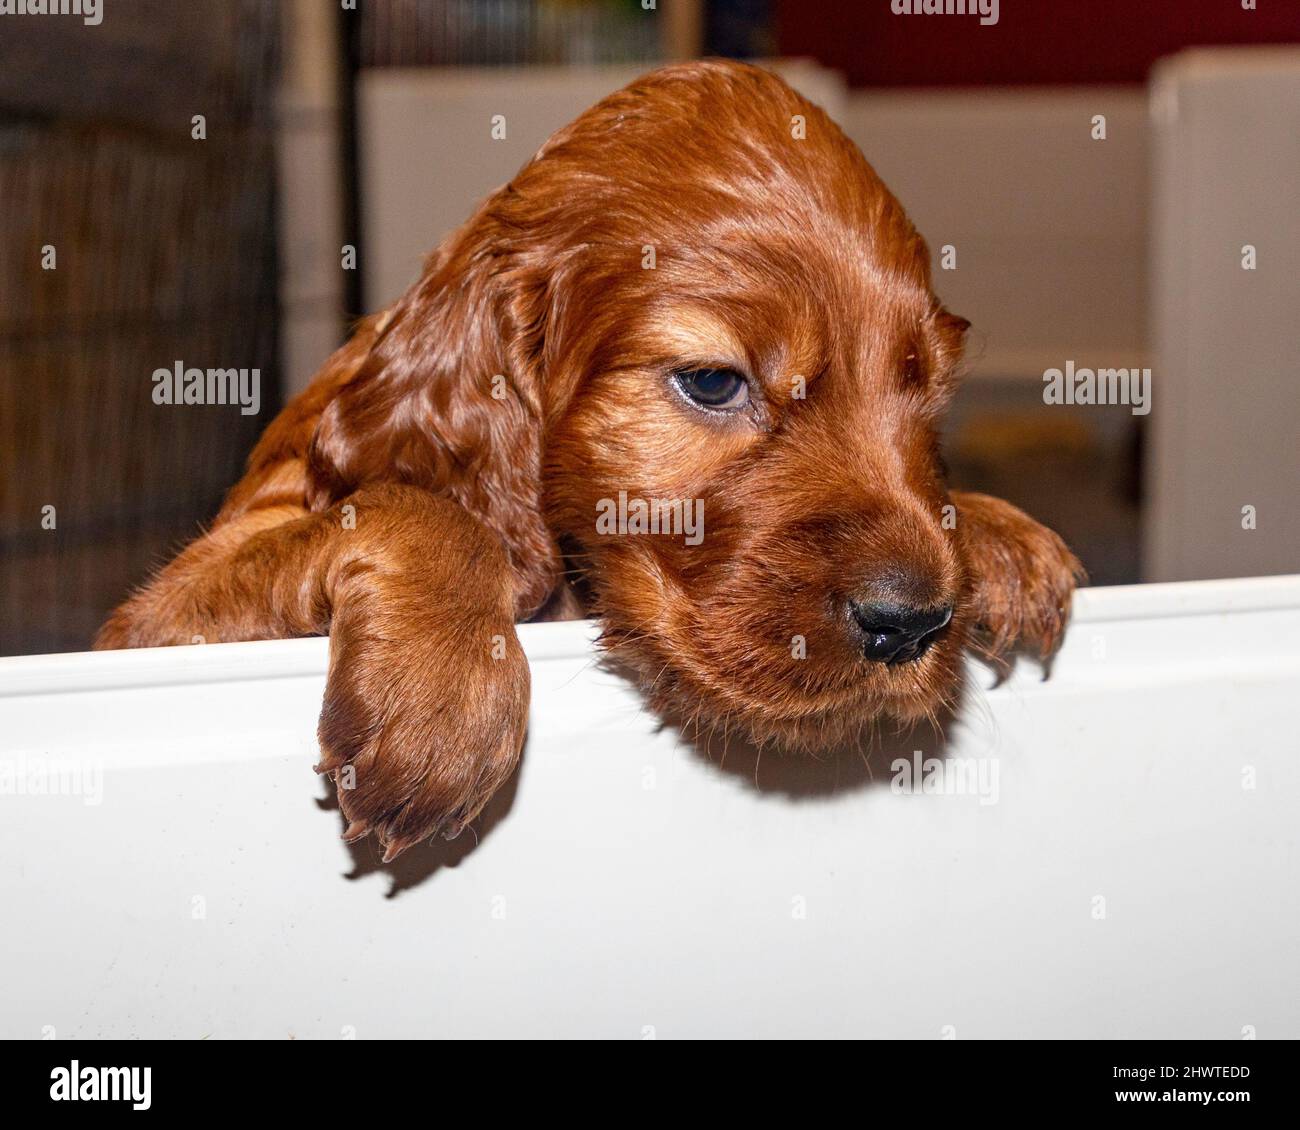 4 week old Irish Setter puppy looking over edge of whelping box. Stock Photo